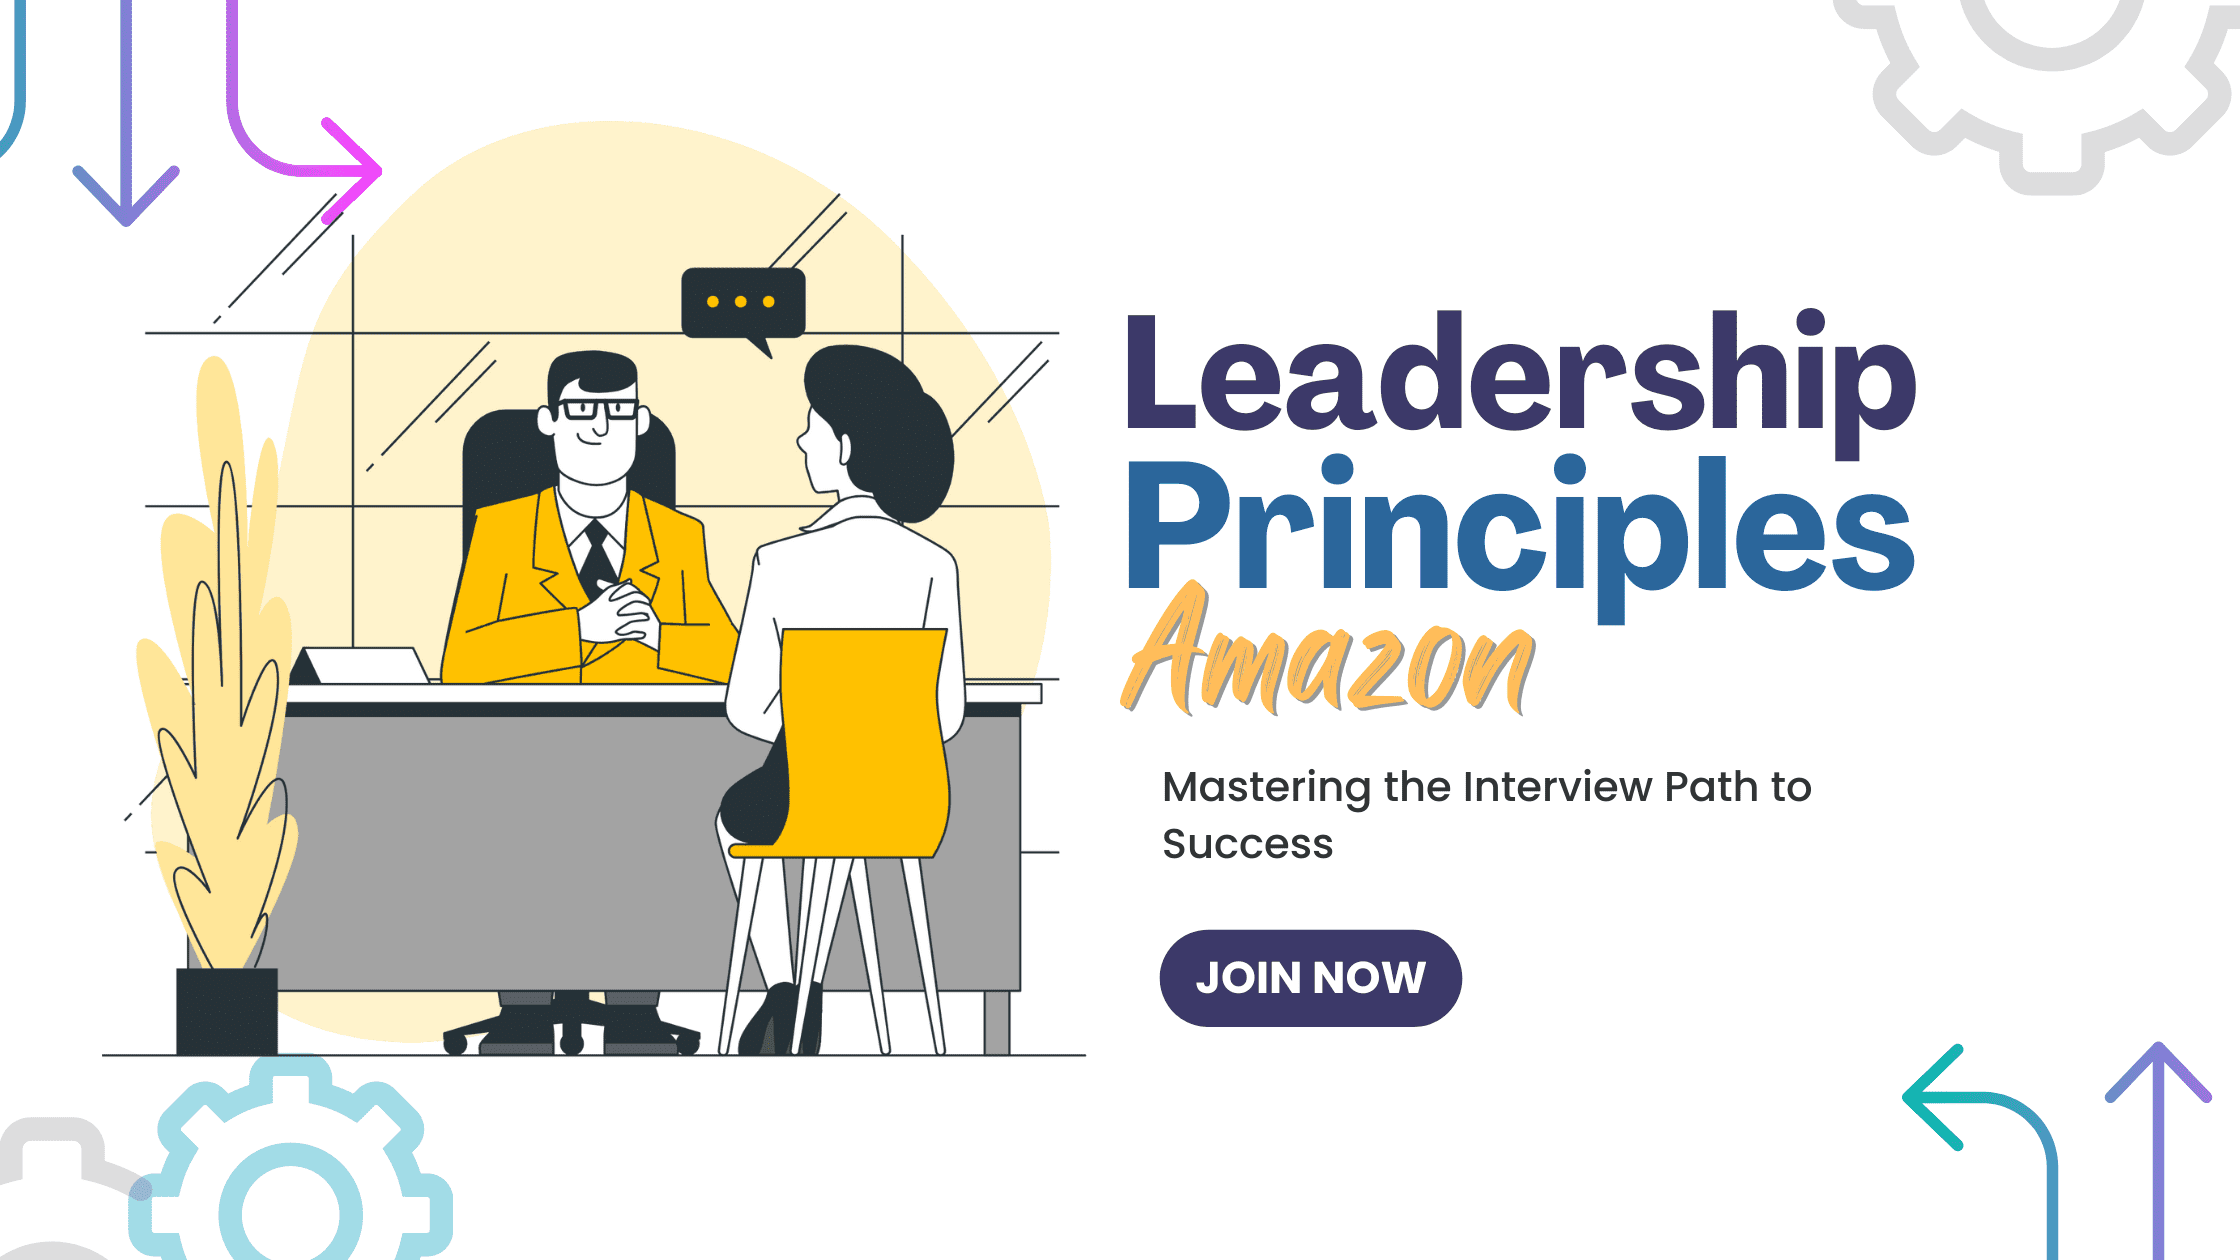 Amazon Leadership Principles Interview: Mastering the Path to Success